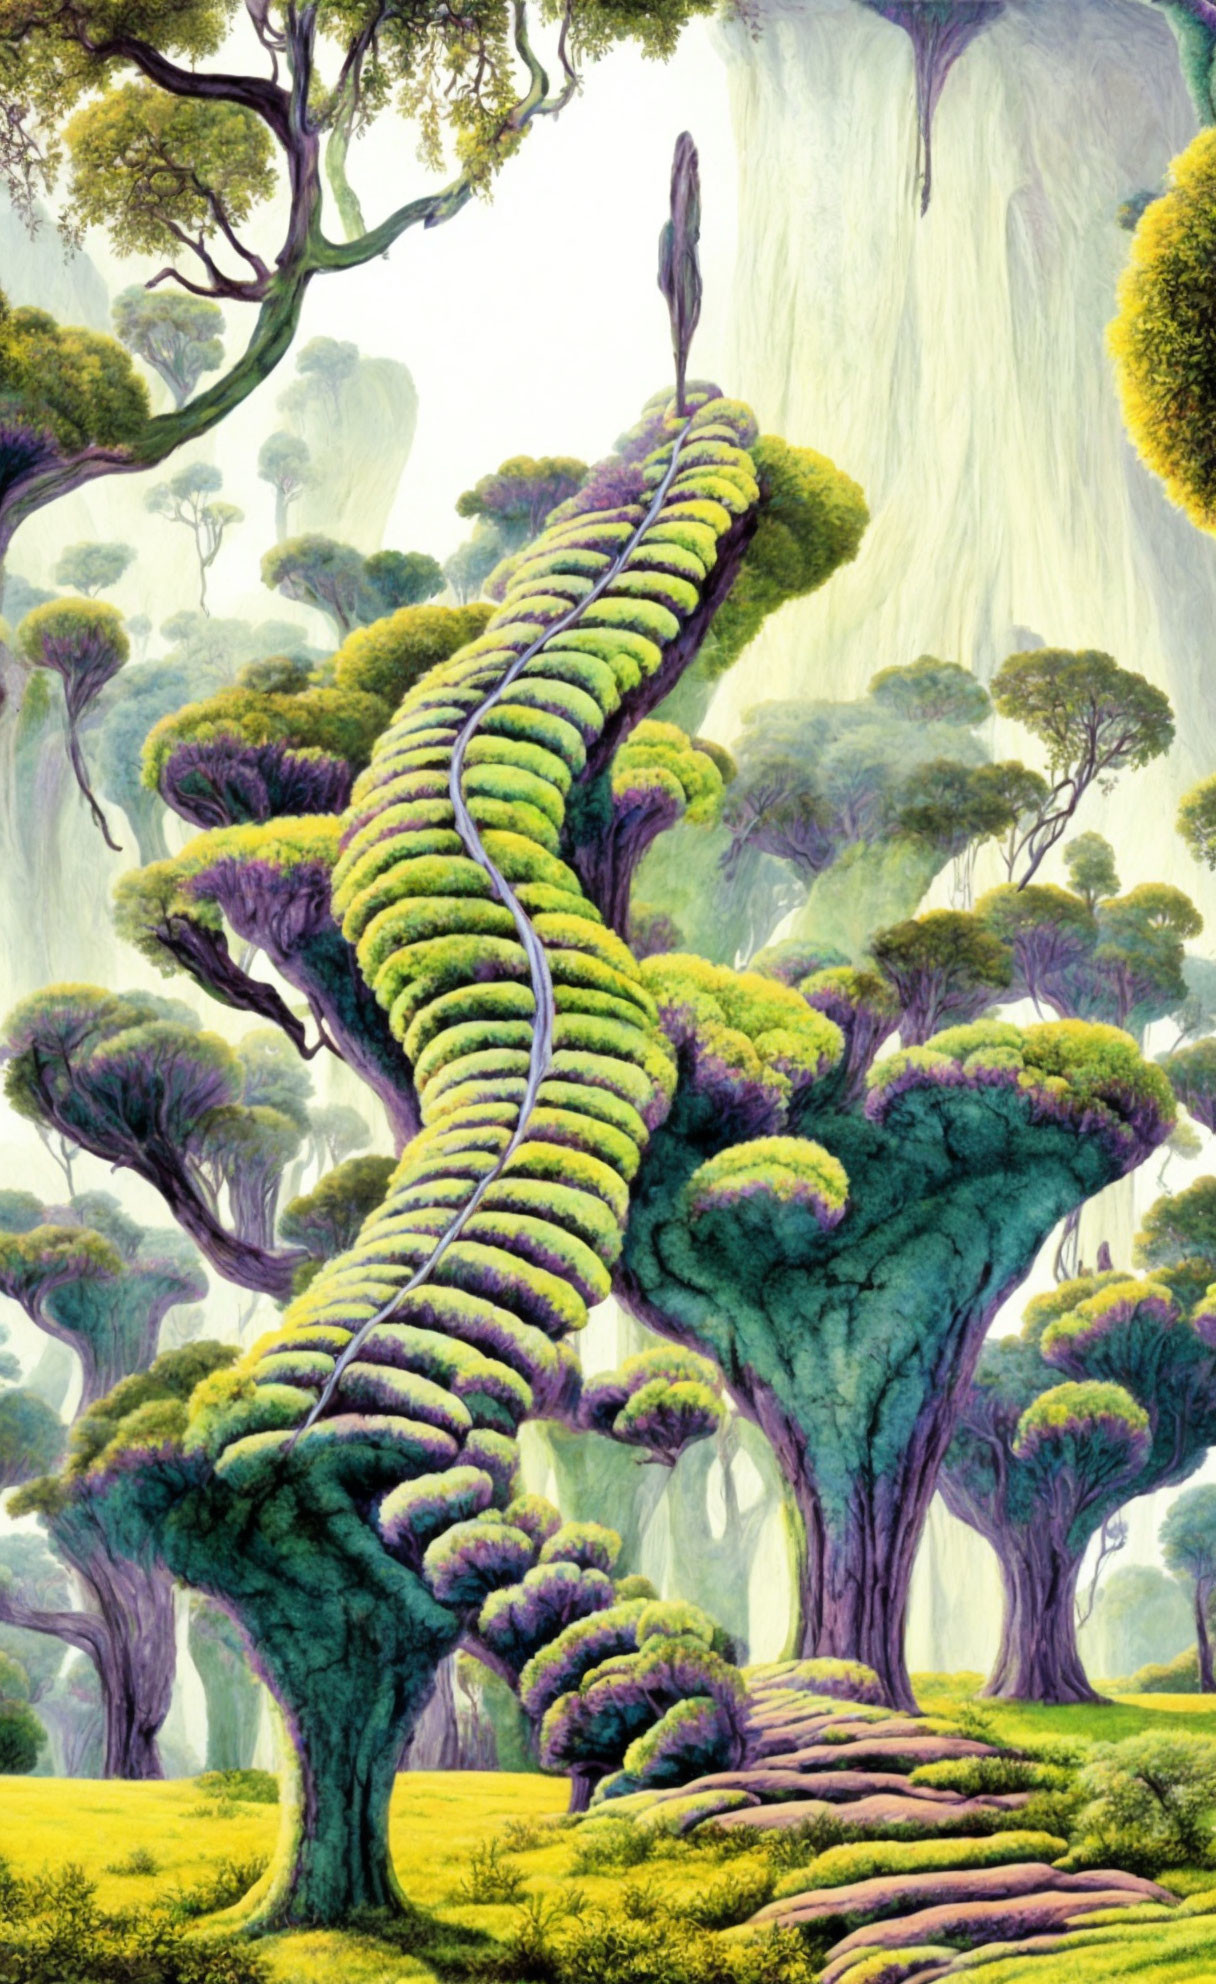 Vibrant green spiral-shaped trees in a fantastical forest